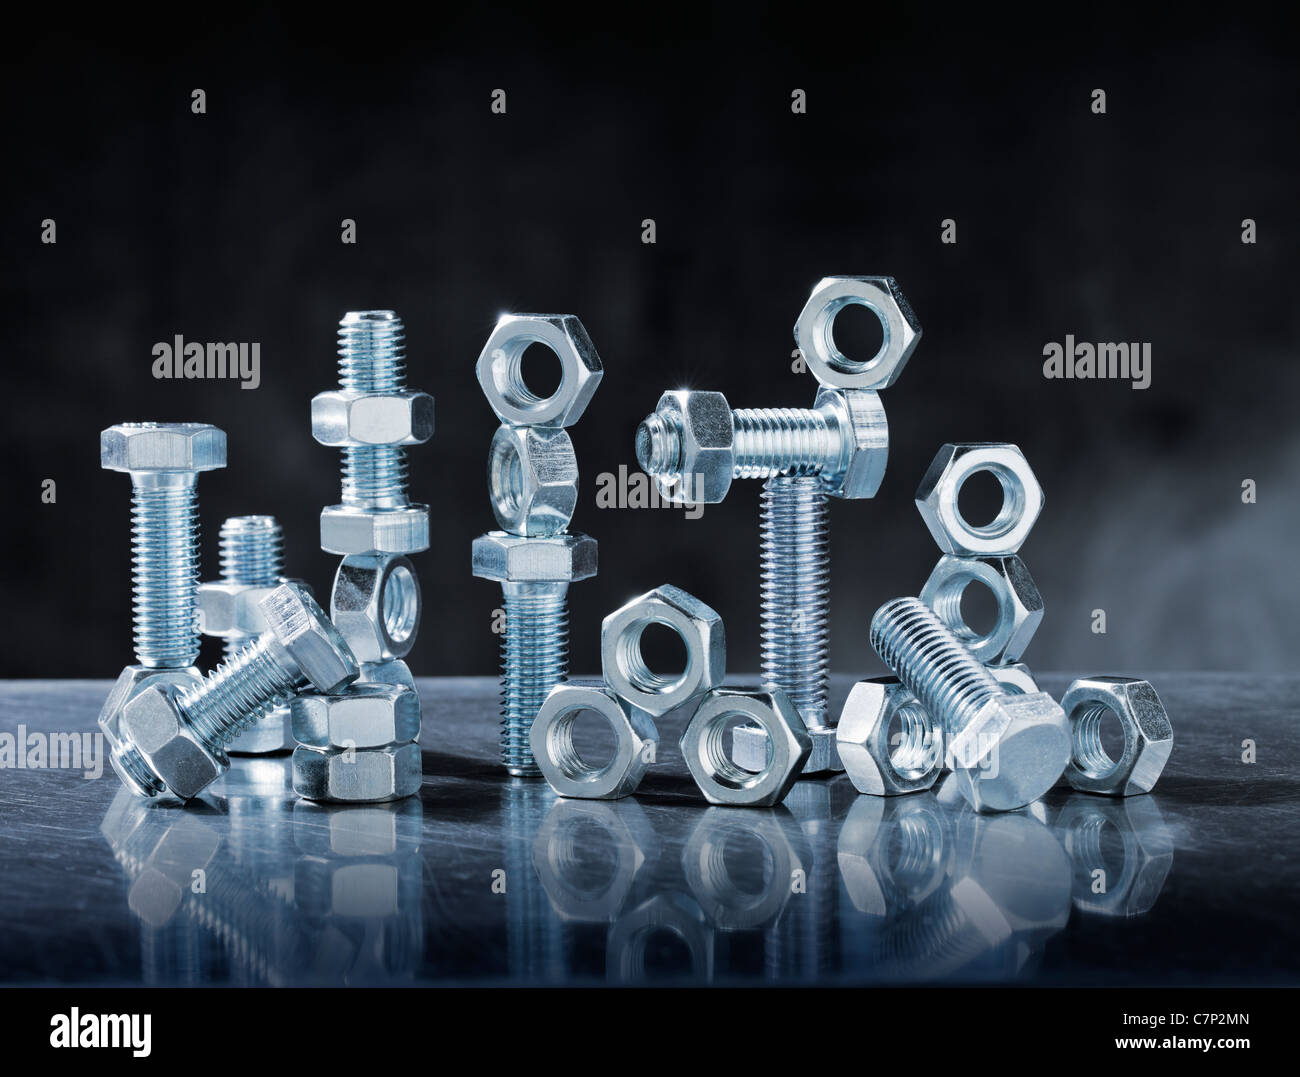 Still Life with Steel Bolts and Nuts. Stock Photo